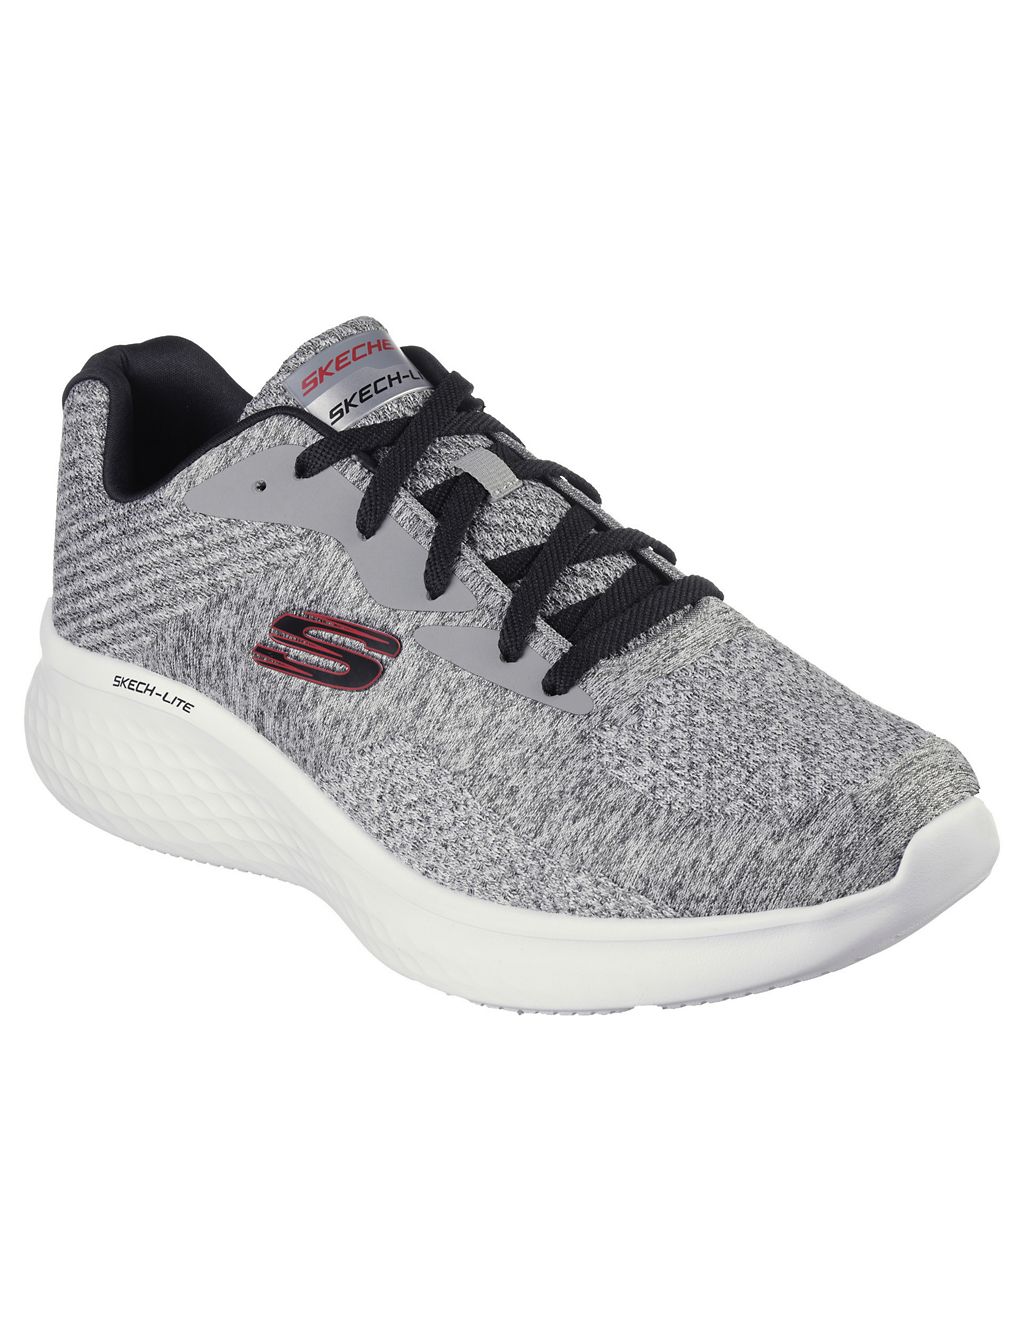 Skech-Lite Pro Faregrove Lace Up Trainers 1 of 5